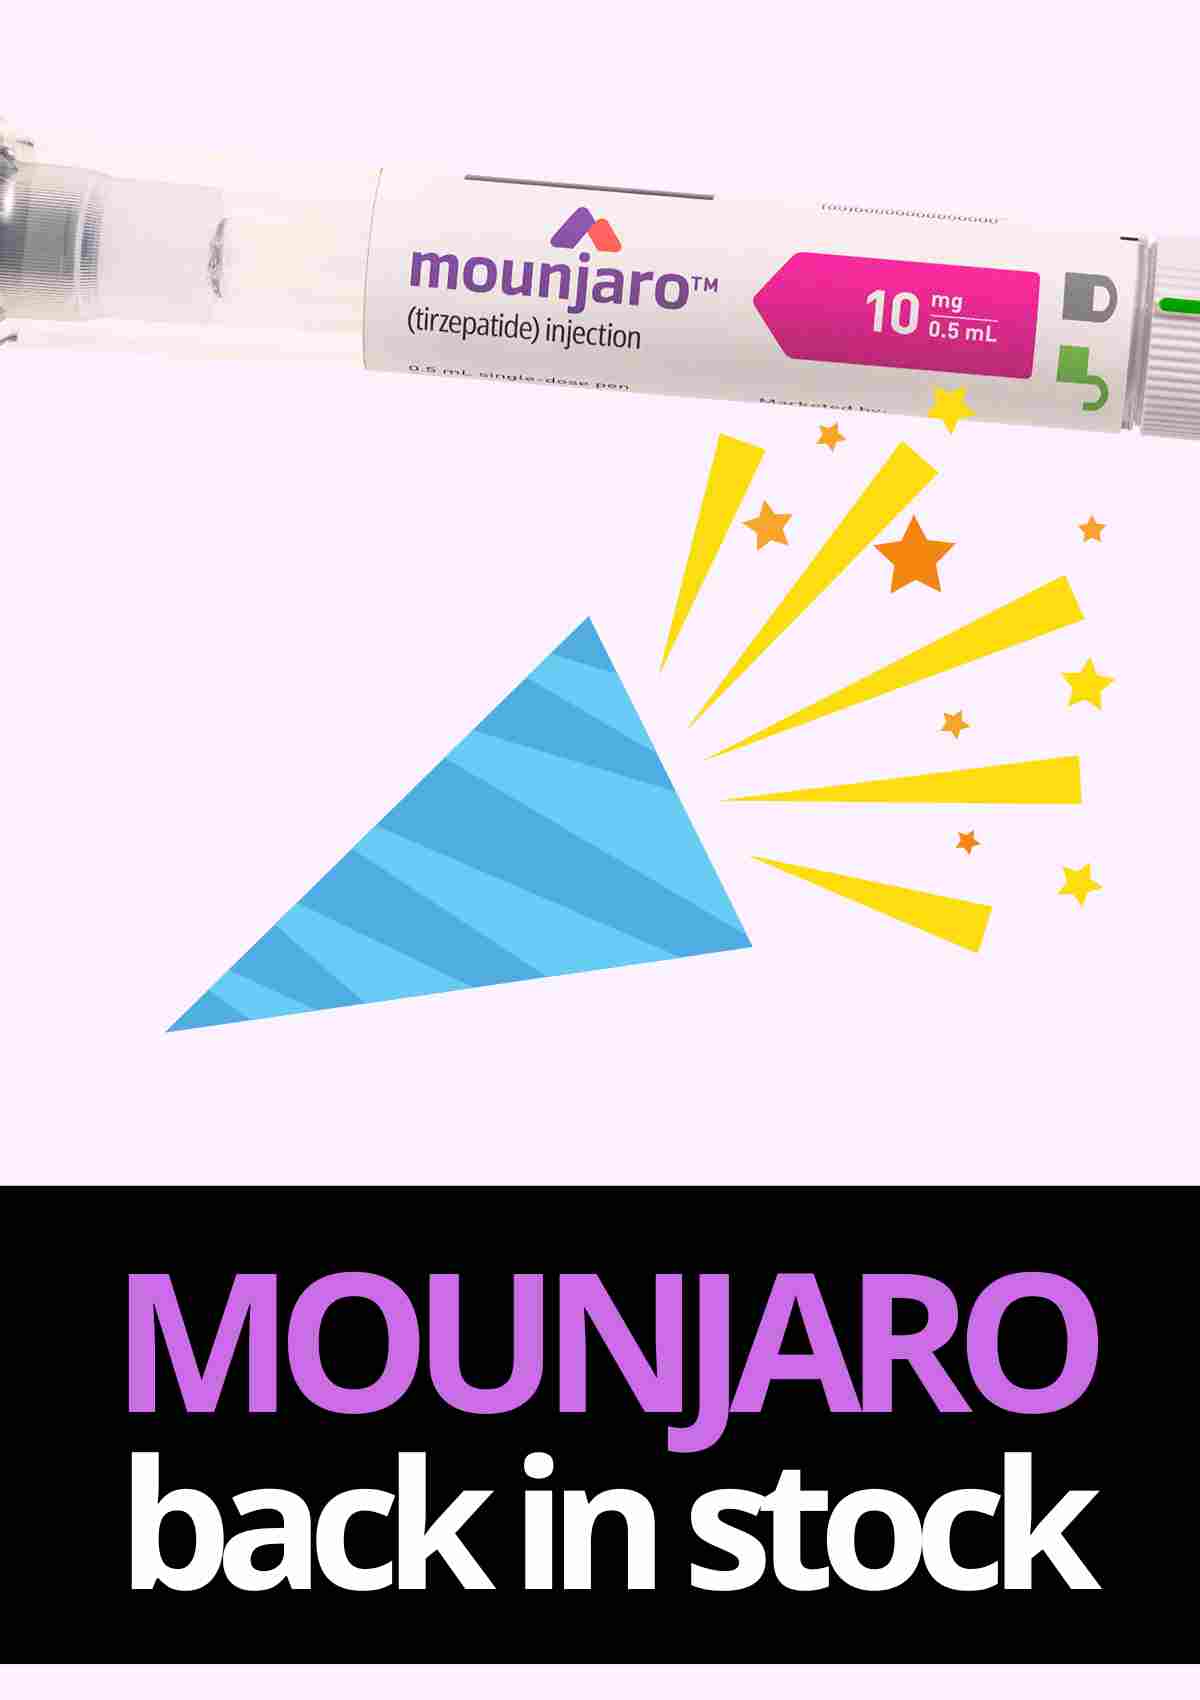 great-news-mounjaro-back-in-stock-after-2-month-shortage